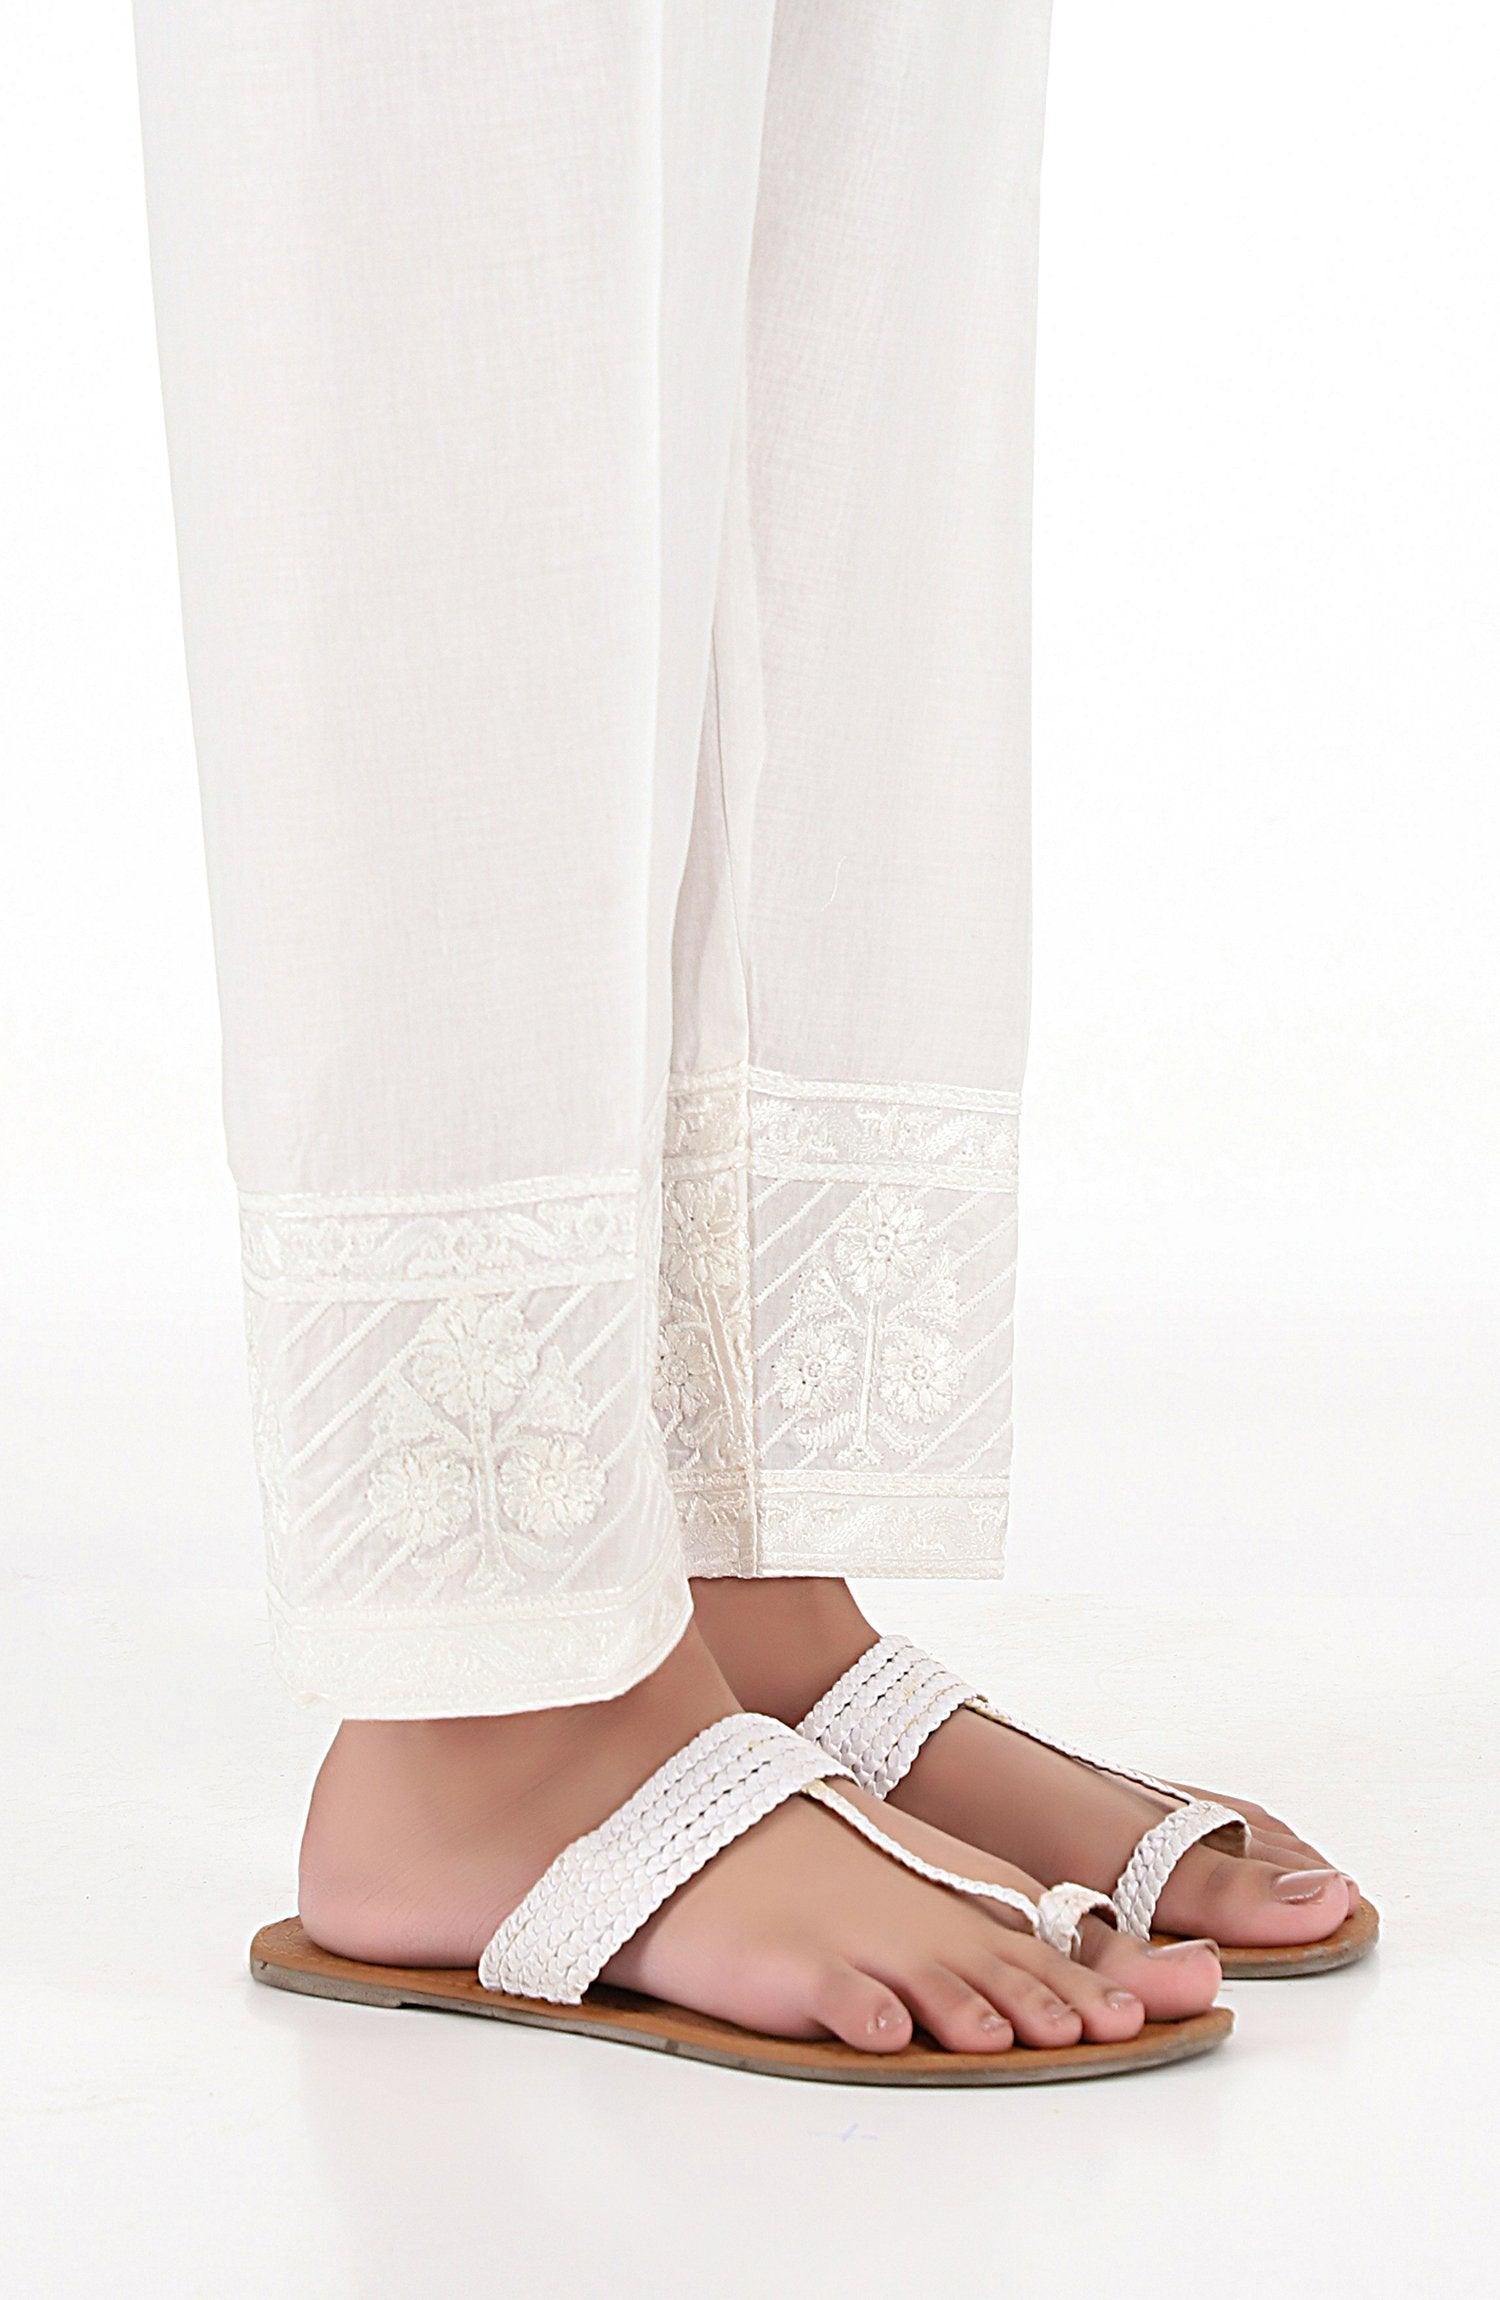 Stitched Embroidered Straight Pants- White (NRPE-027 WHITE)